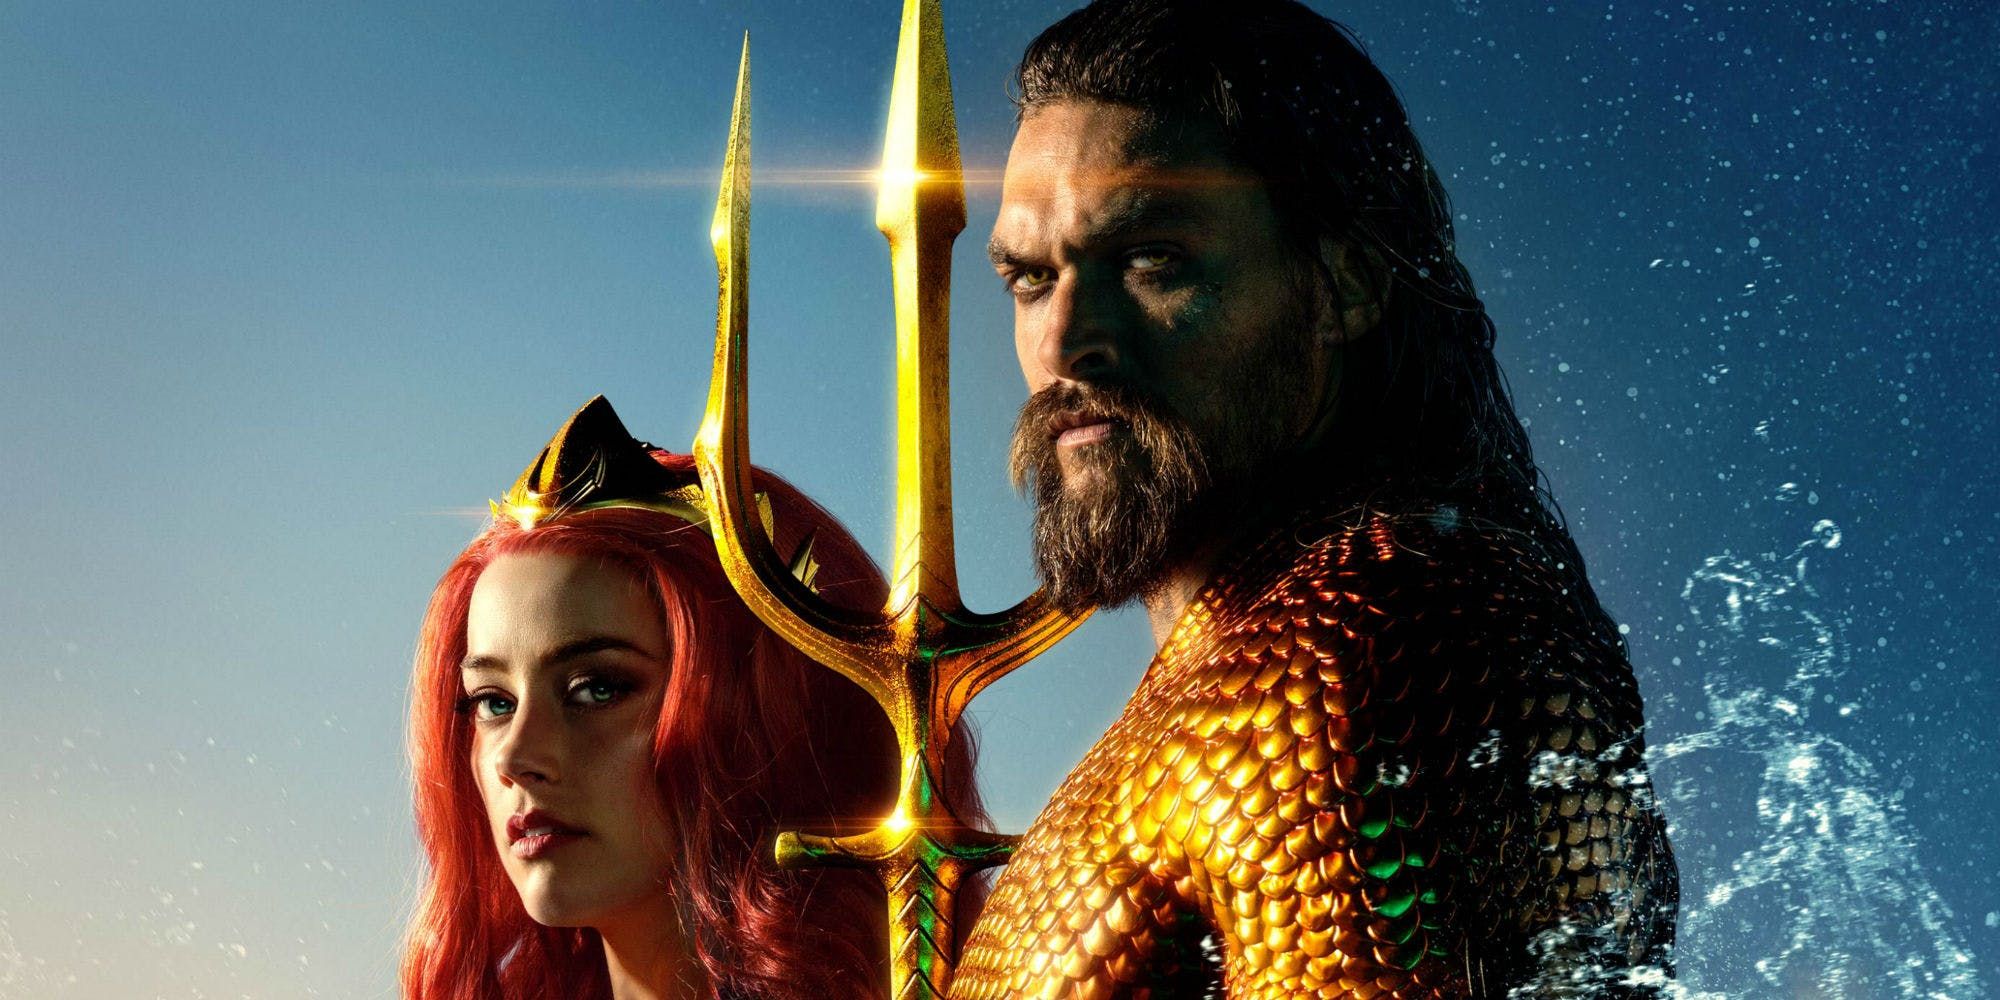 Aquaman movie poster featuring Arthur Curry and Mera in classic costumes